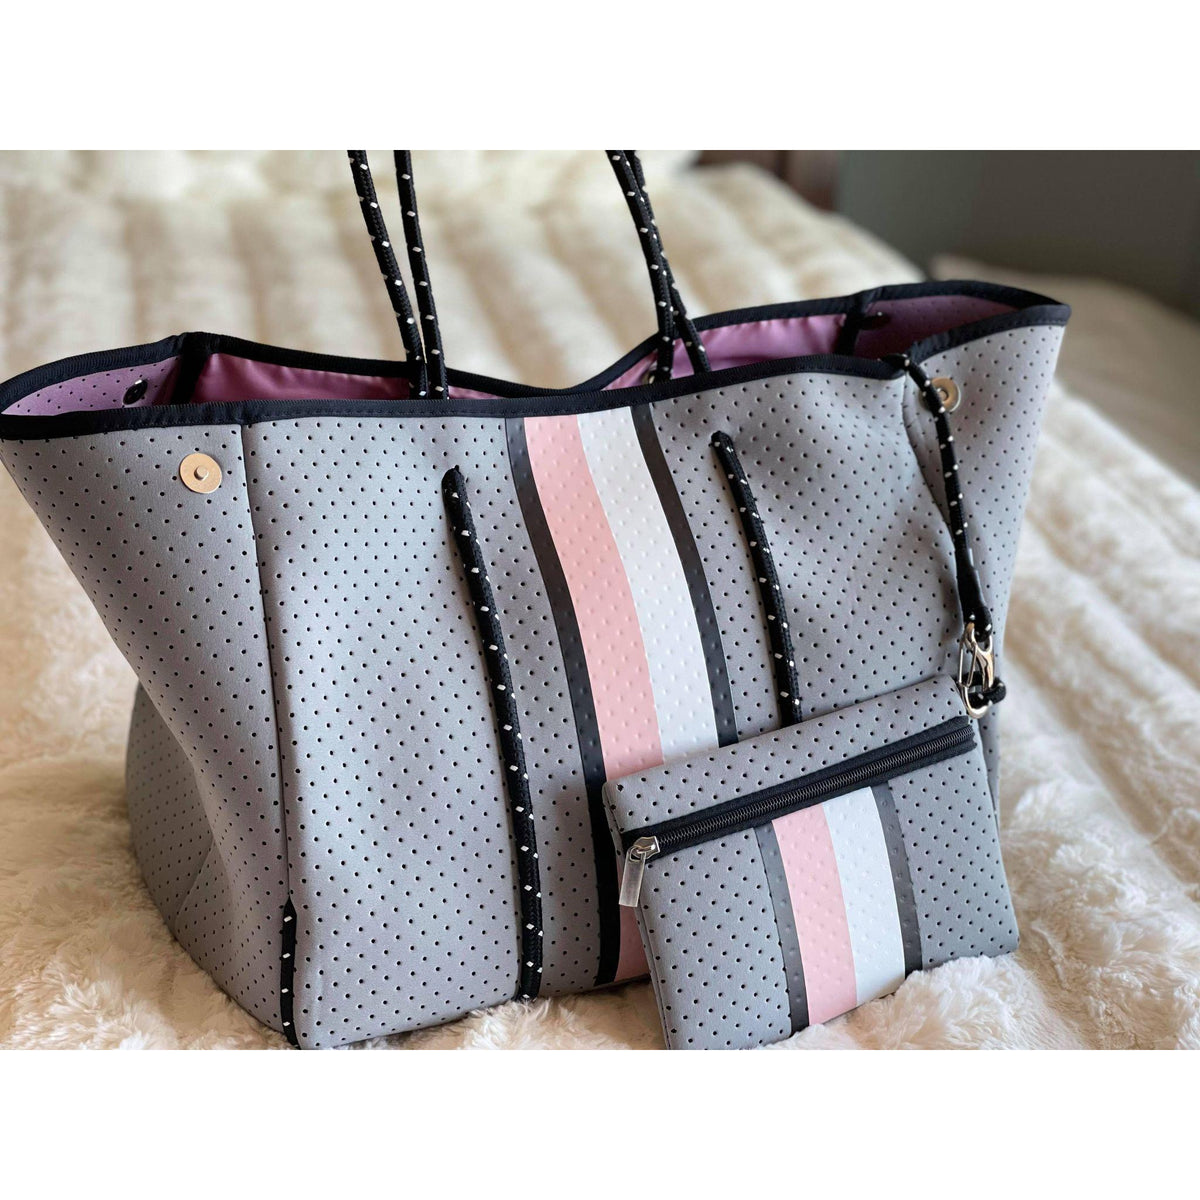 How cute is this neoprene tote! If you love the Louis Vuitton print, you'll  love this. Perfect for summer ☀️ Only $60 🤩 • • • #iconicsalonandboutique, By Iconic Salon and Boutique